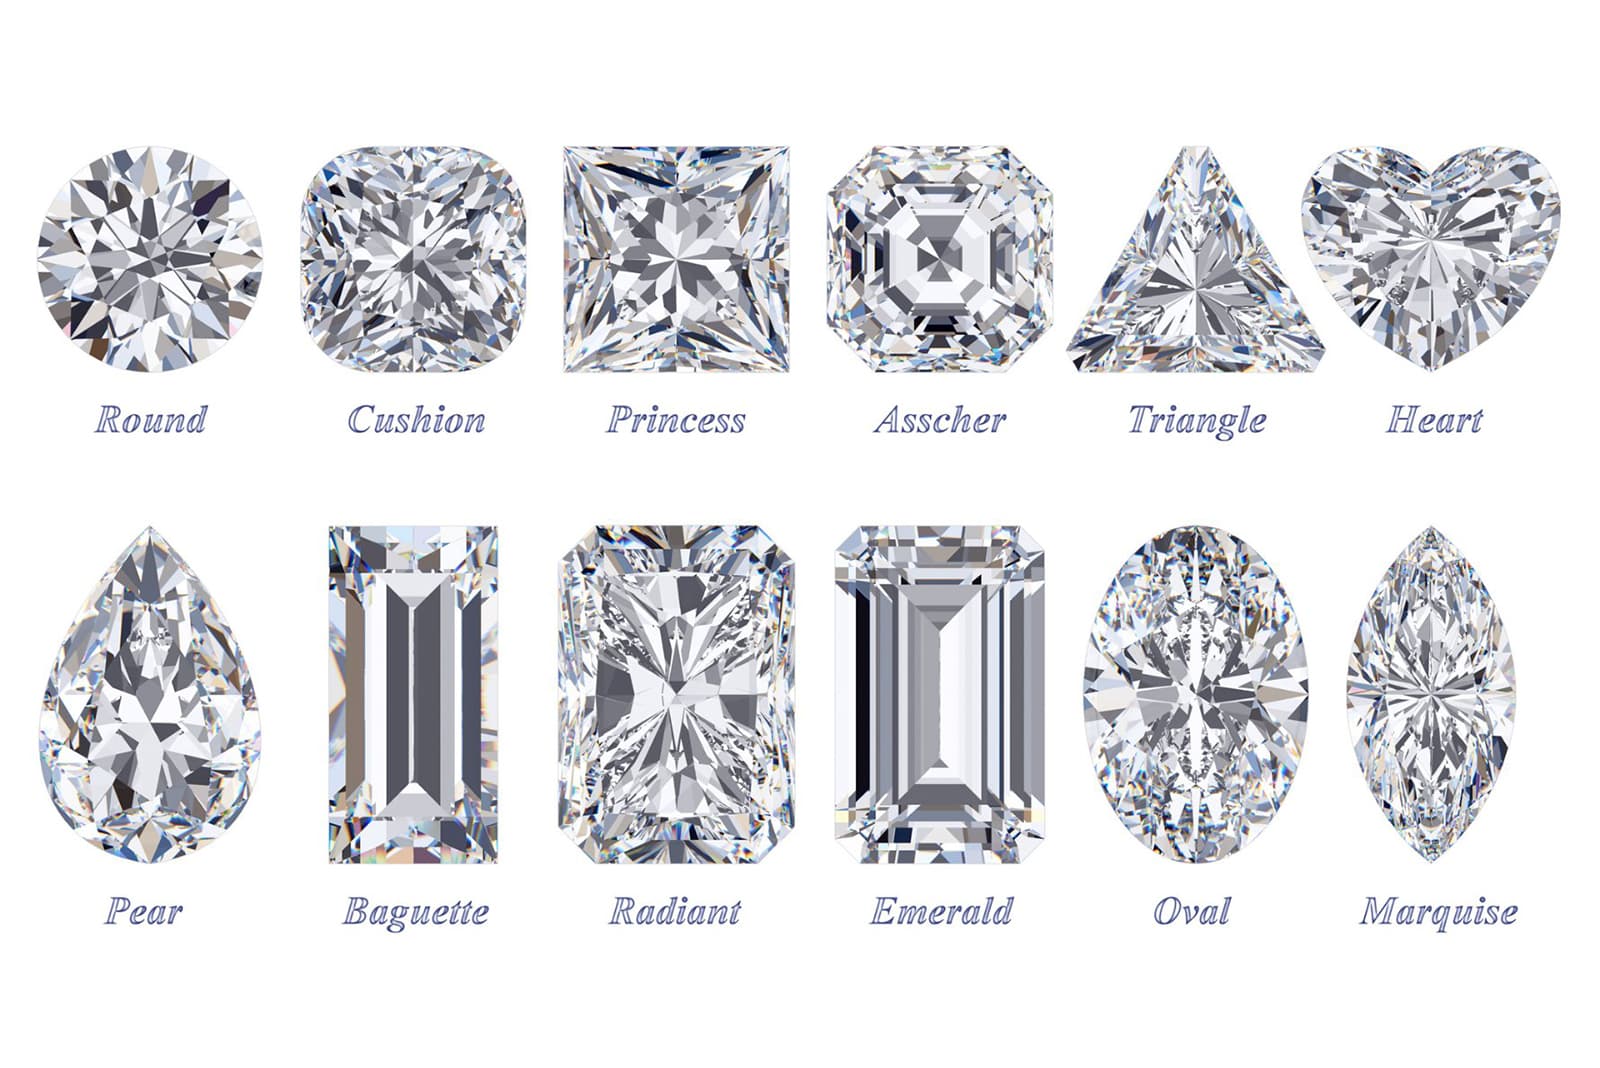 A selection of the most popular diamond and gemstone cuts